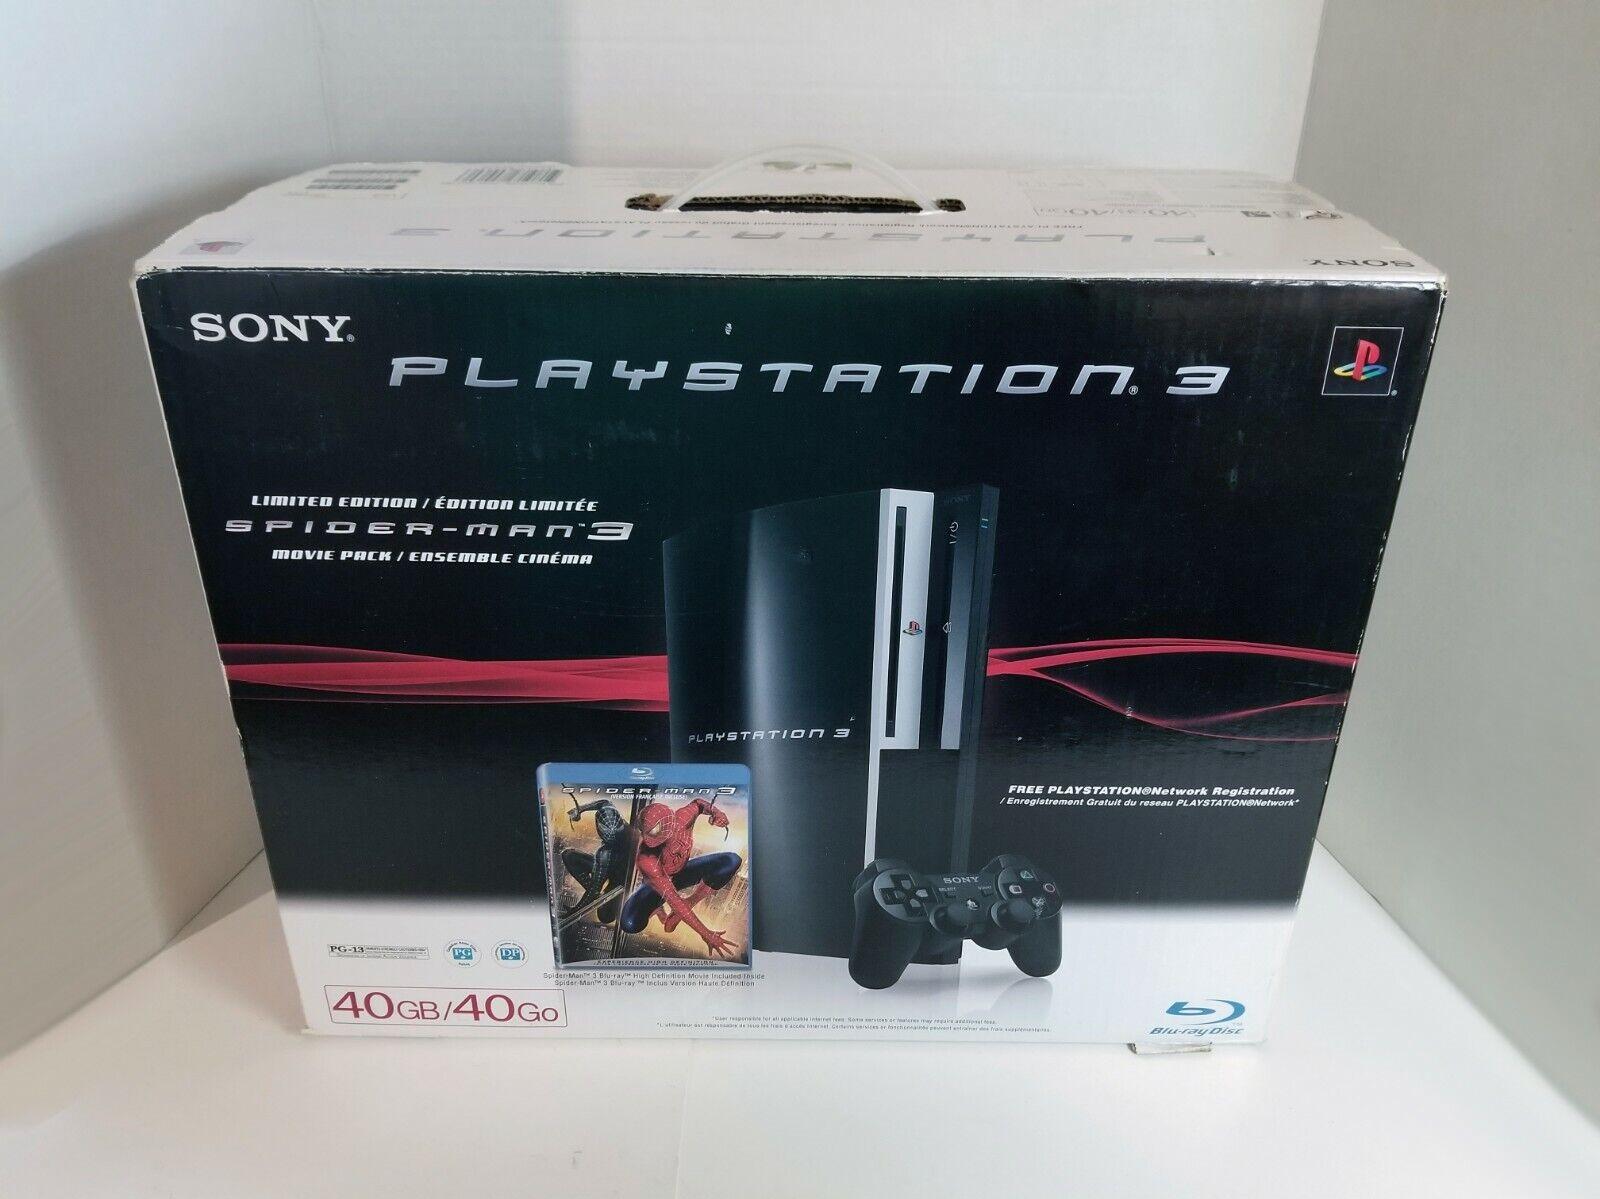 Sony Playstation Ps3 Spiderman Launch Edition 40gb Console